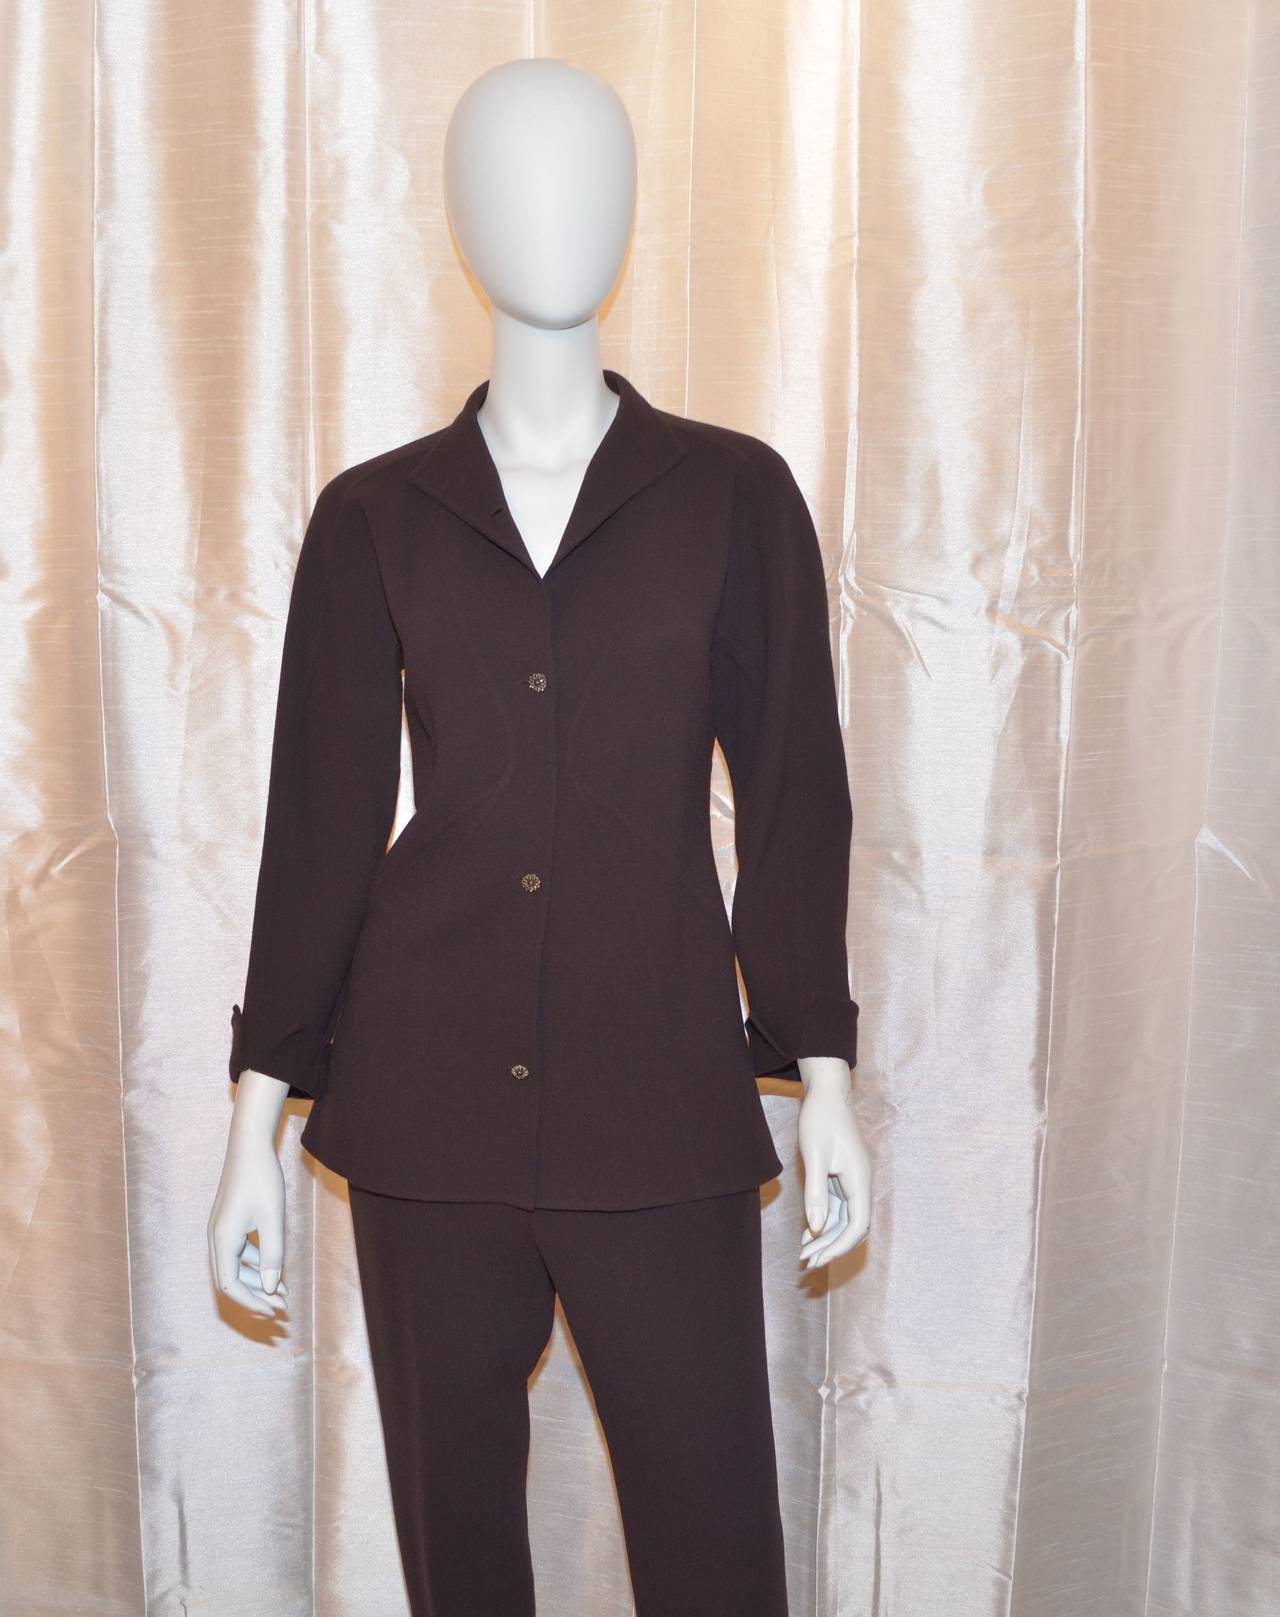 Ralph Rucci suit jacket is a double faced wool with no lining and has four button closures at the front, two holes at the back center for an optional belt that is not included. Welted design lines. Very modern. Pants have a side zipper and